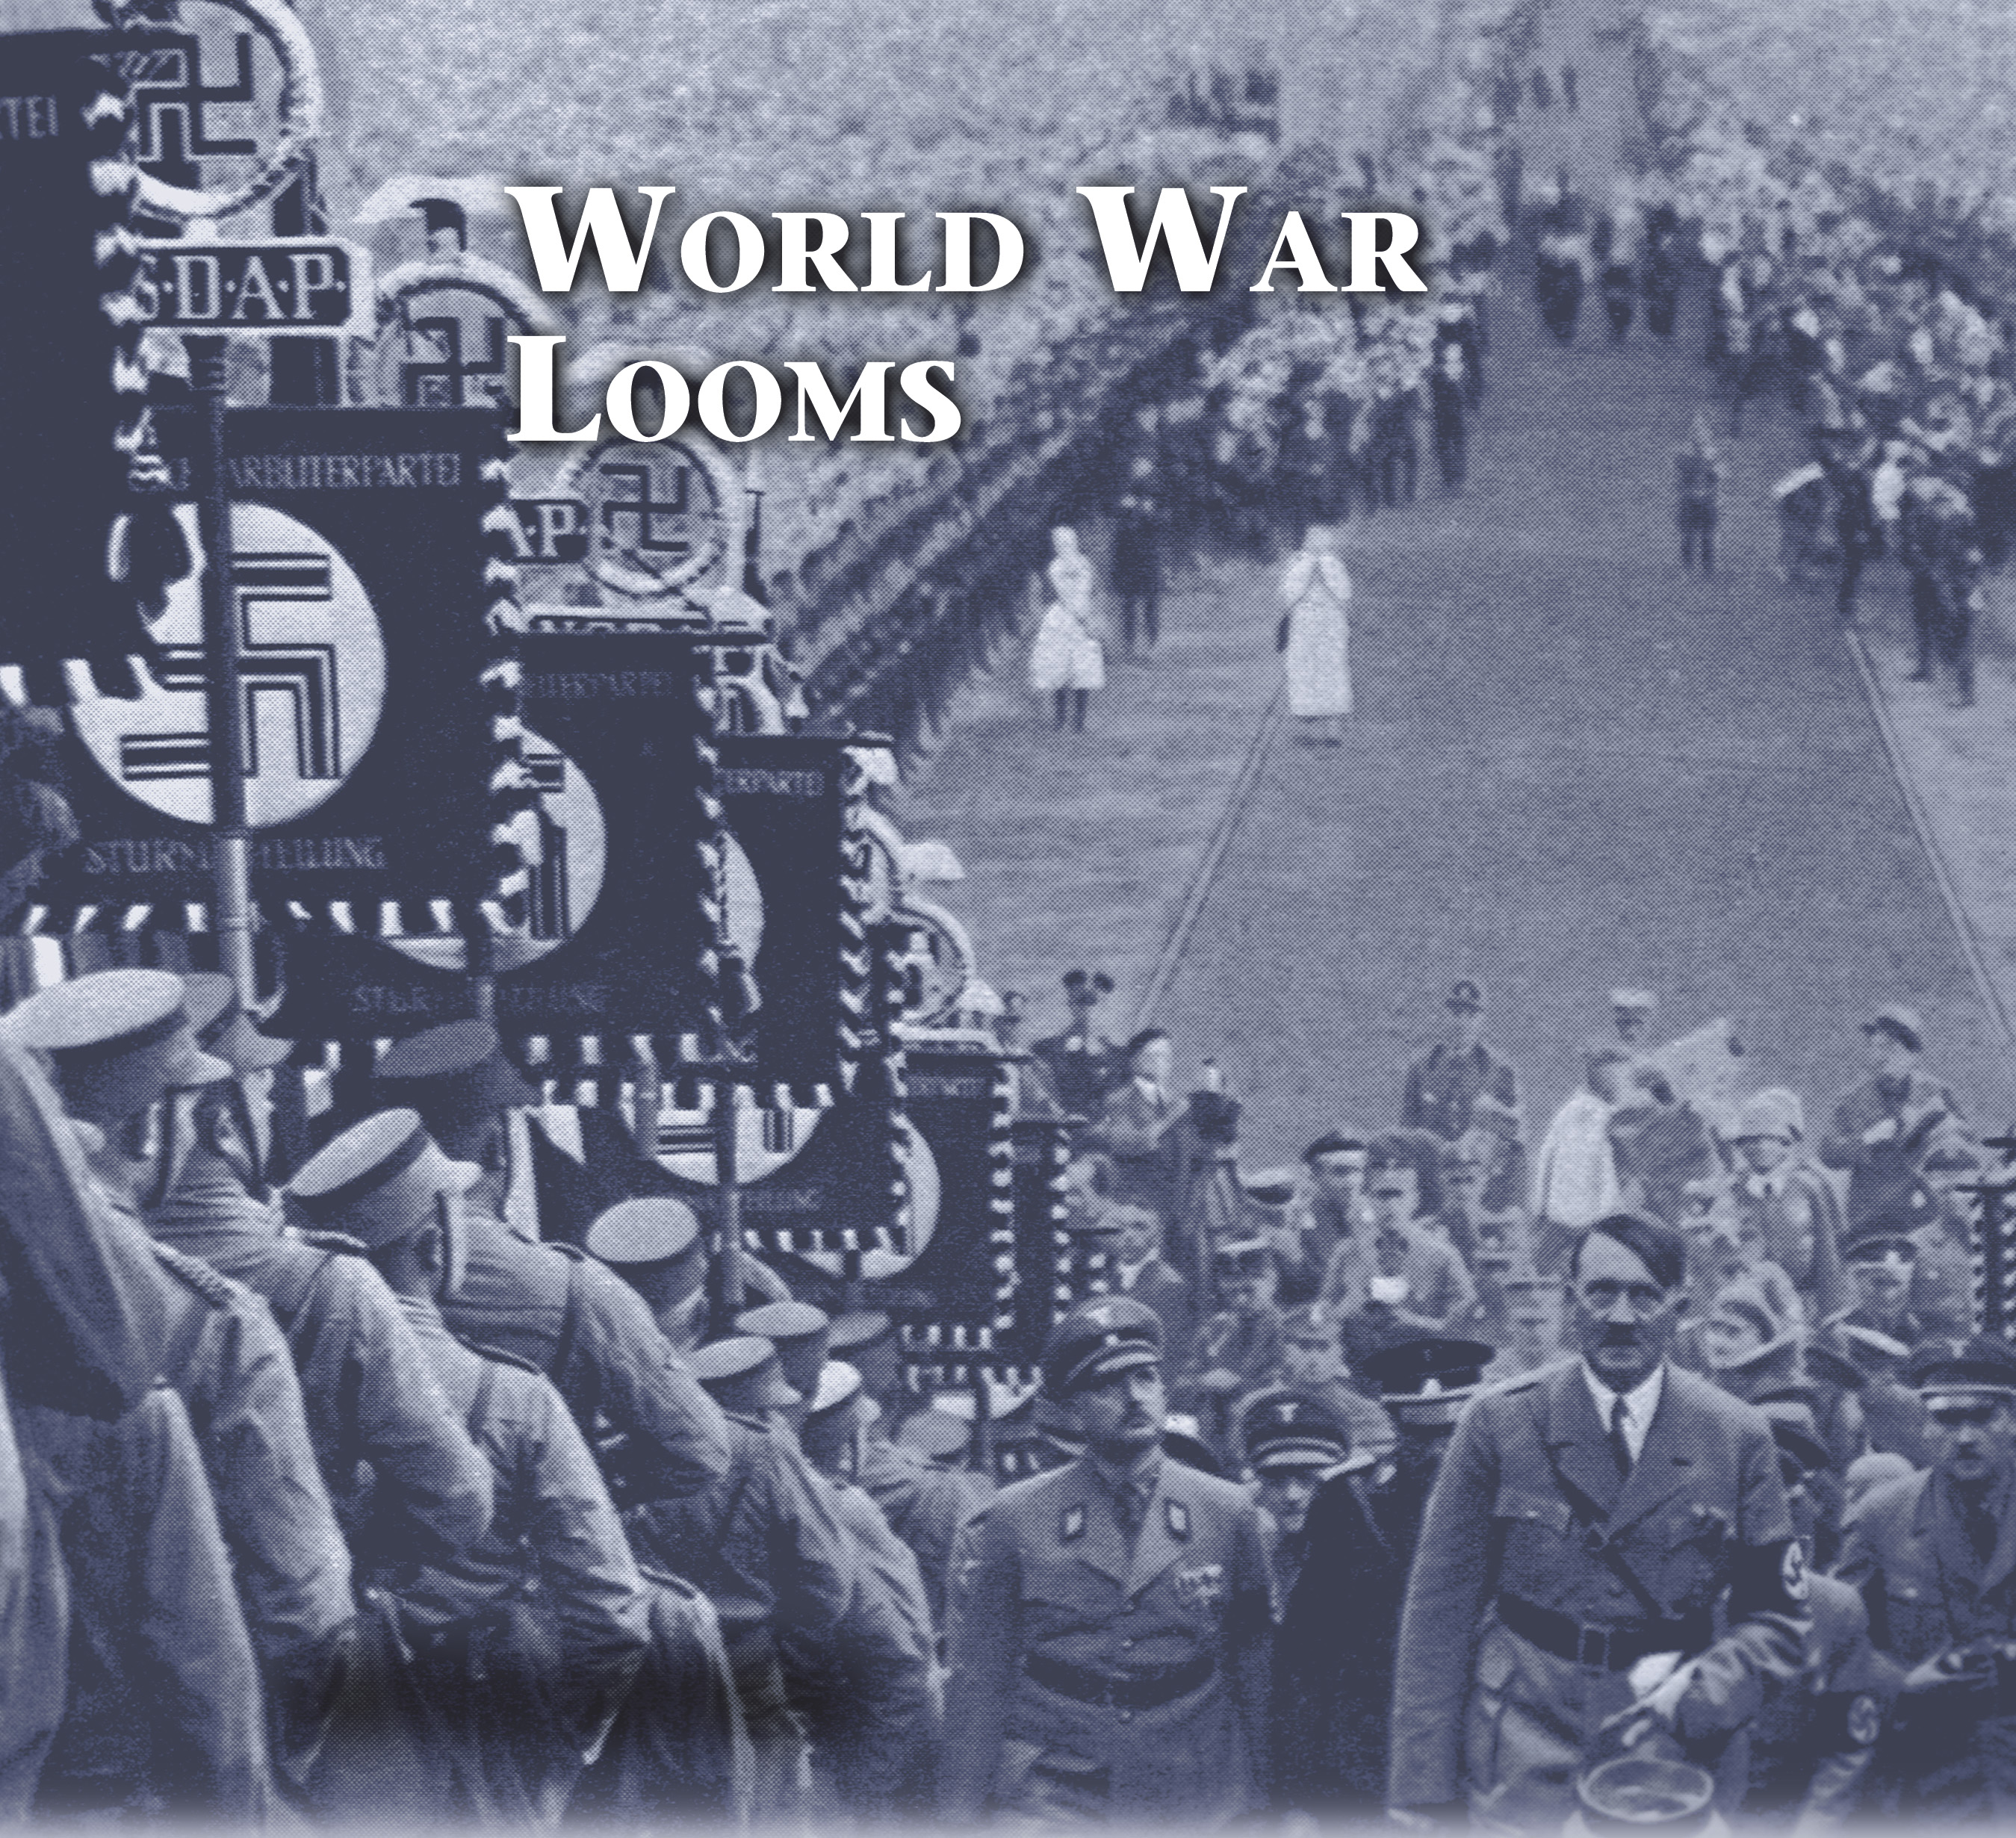 Photo: Hitler and troops with Nazi flags.  A title: World War Looms